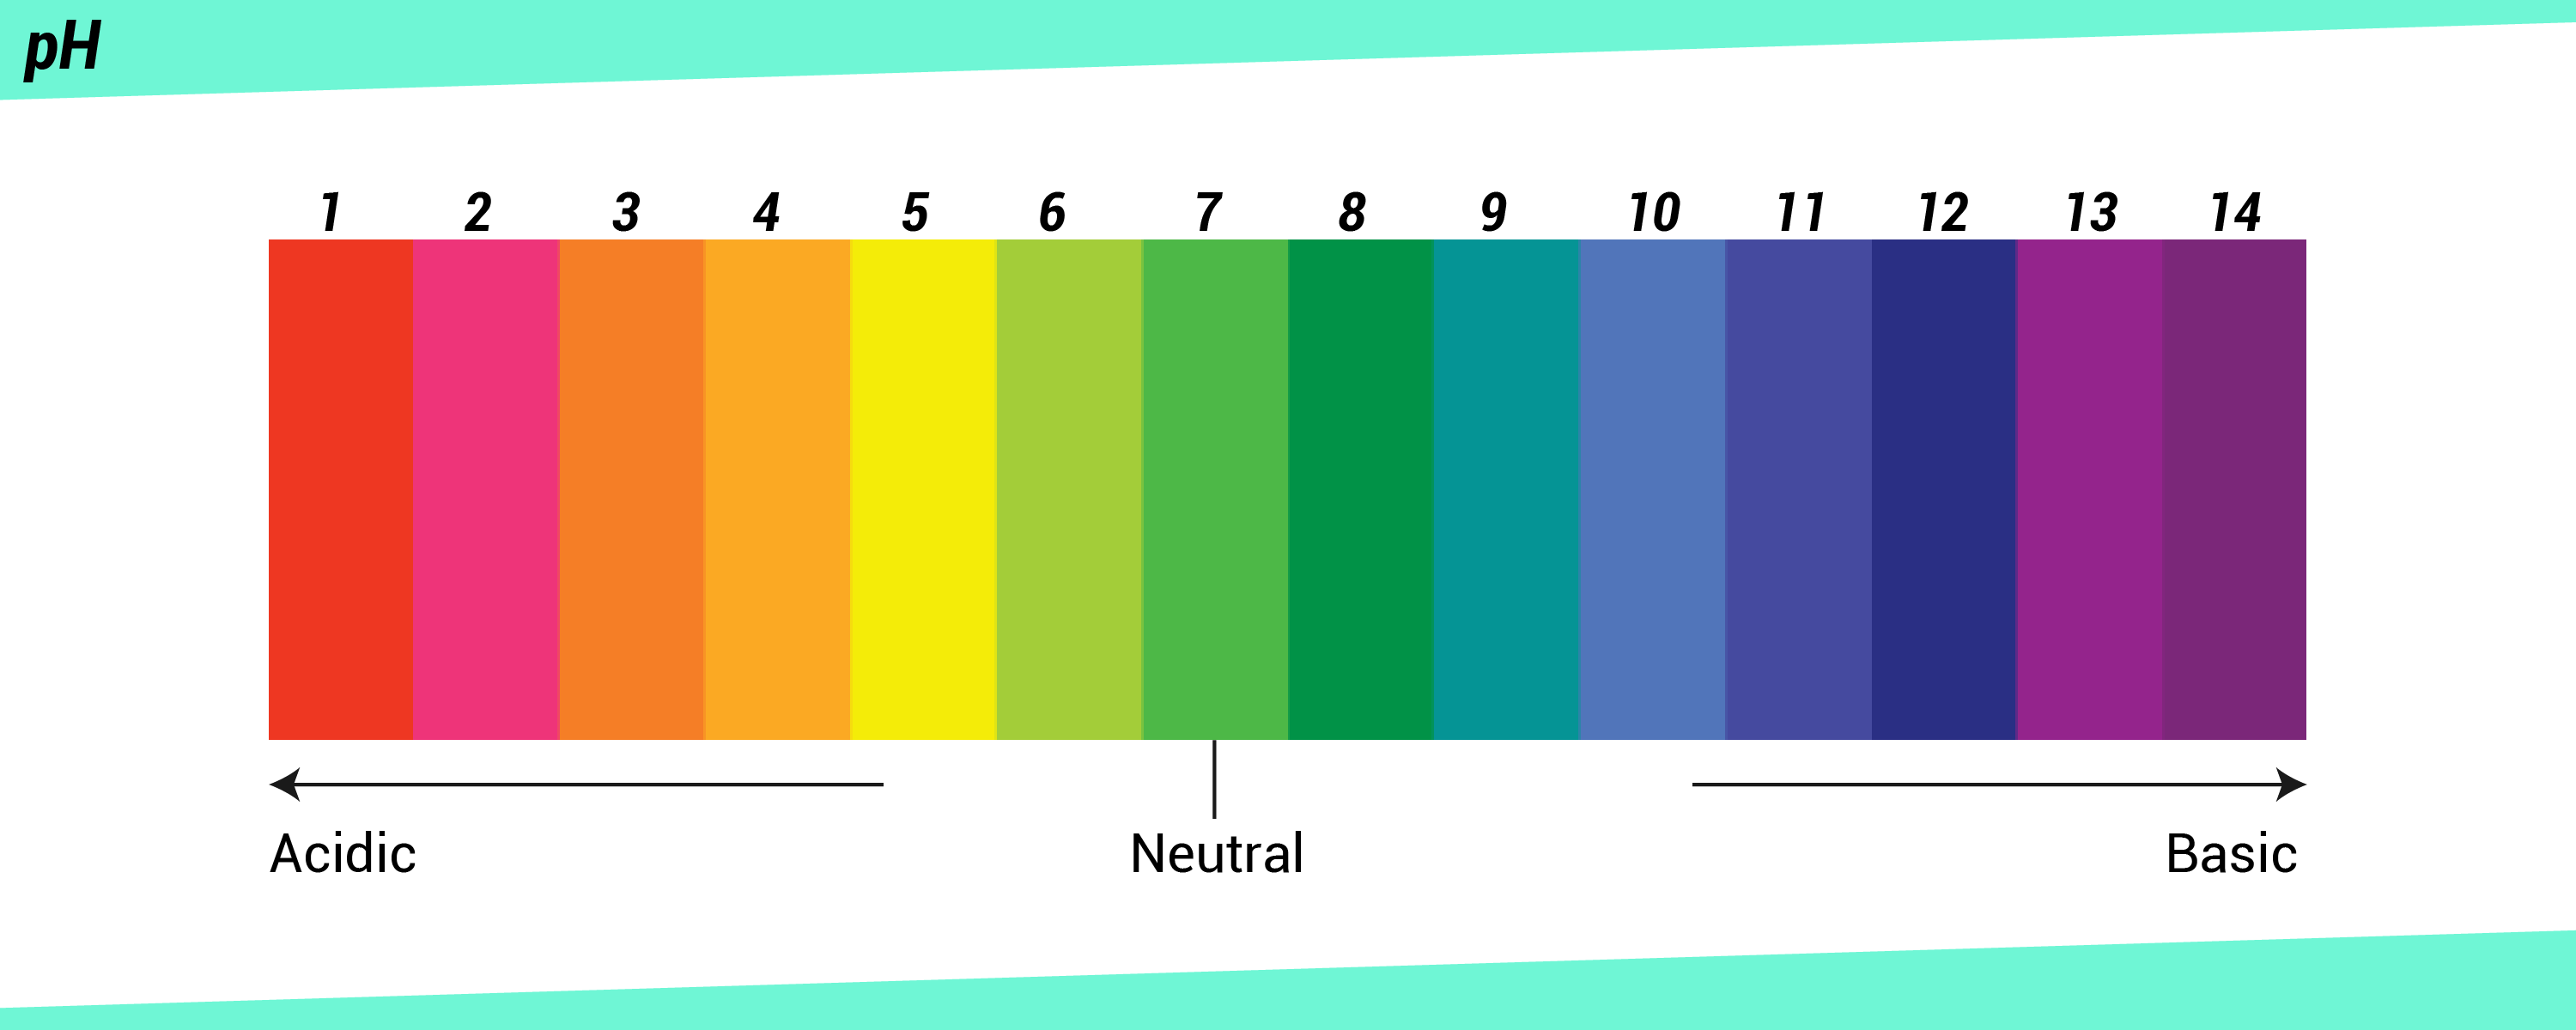 pH scale from acidic to neutral to basic